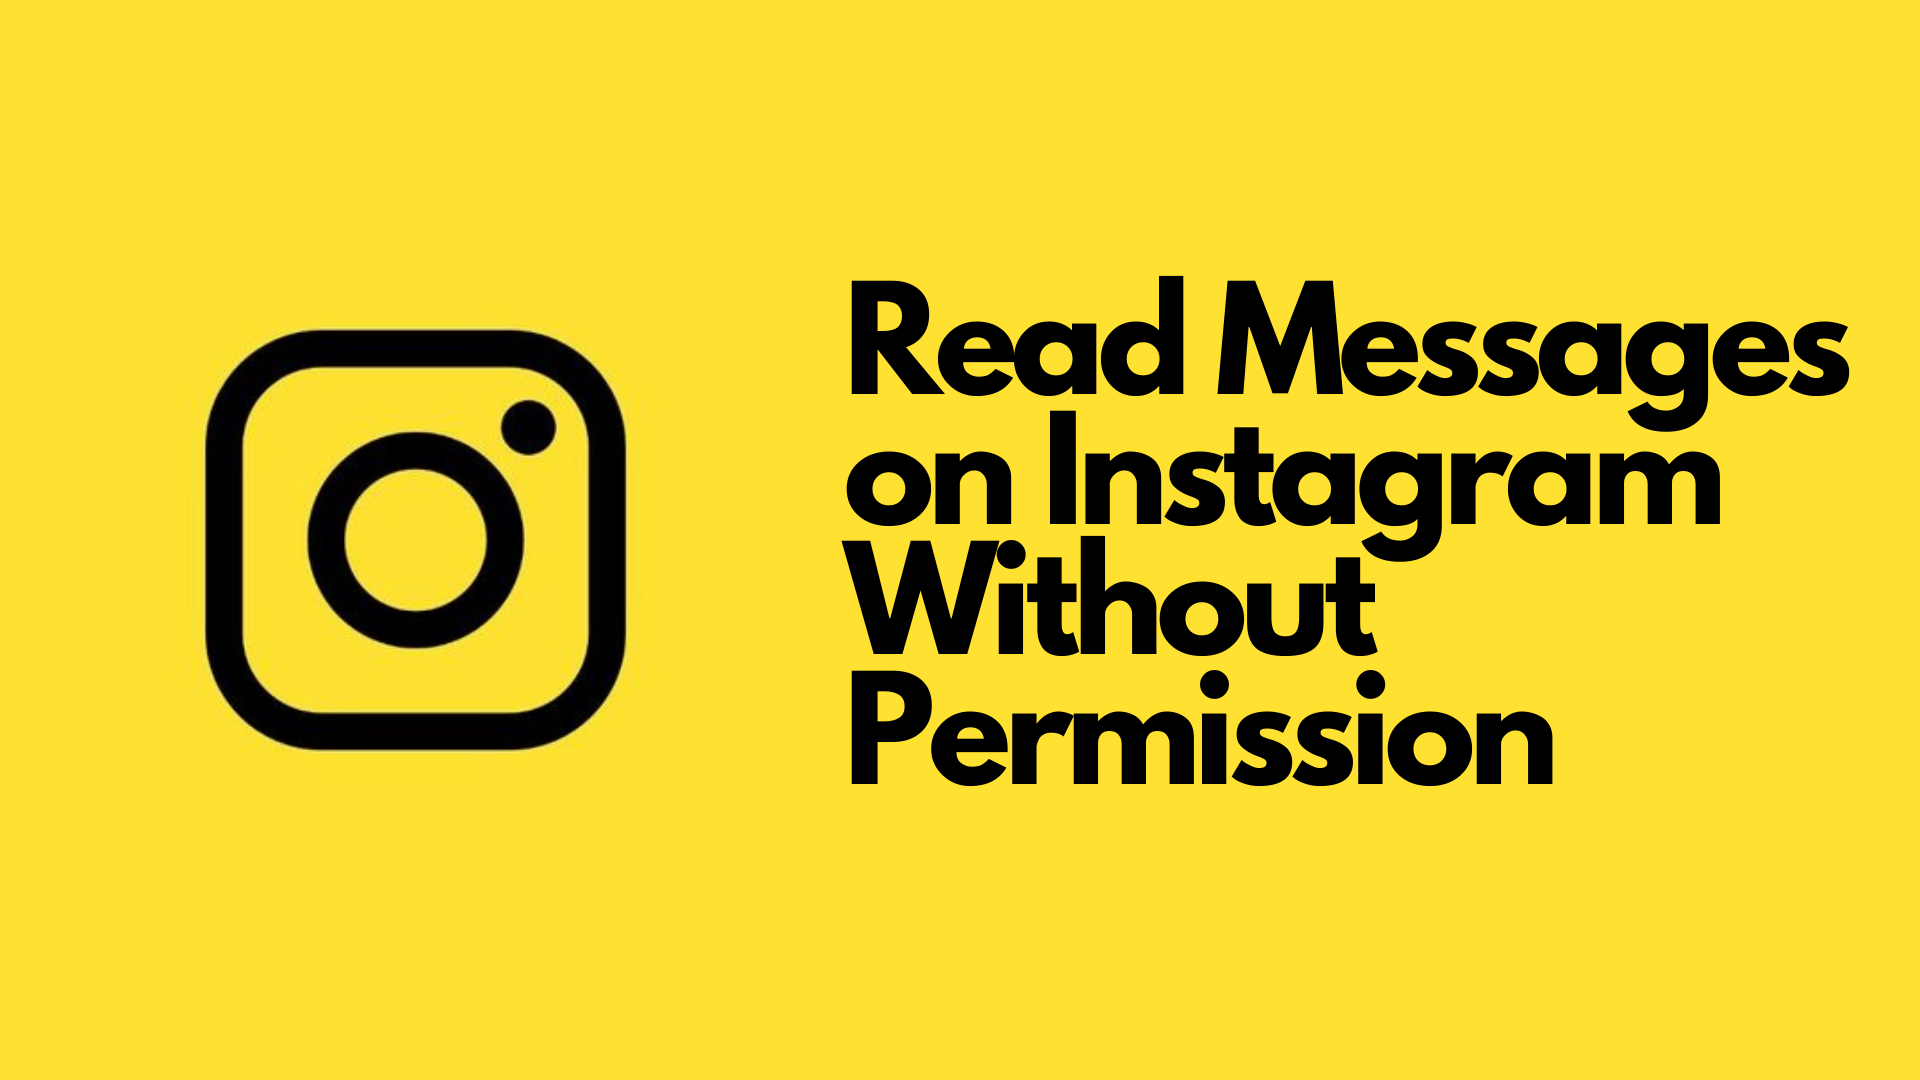 Ultimate Guide to Instagram Spy Apps: How to Read Messages on Instagram Without Permission